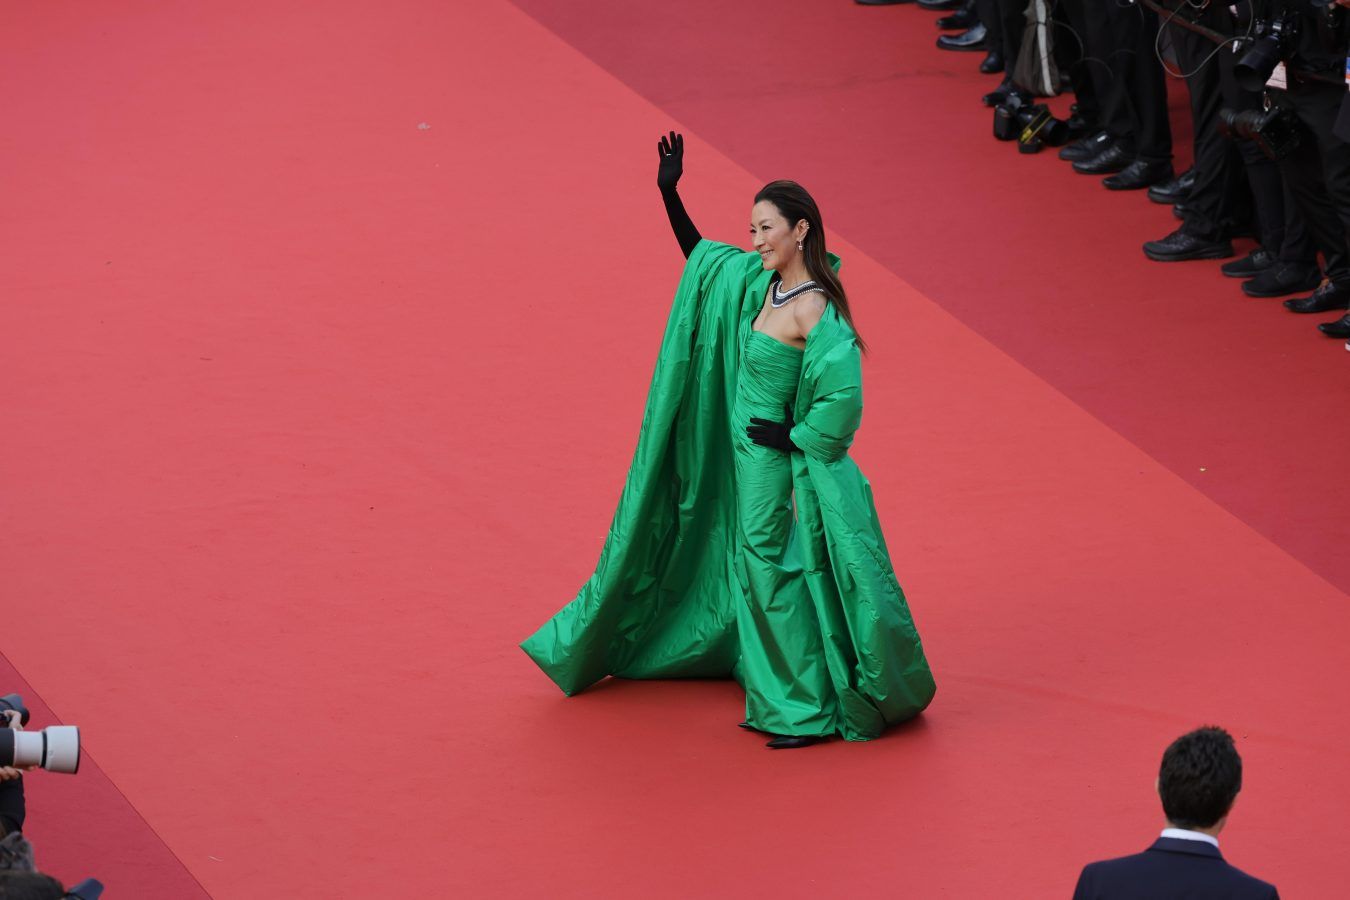 A breakdown of celebrities' looks seen at the 76th Cannes Film